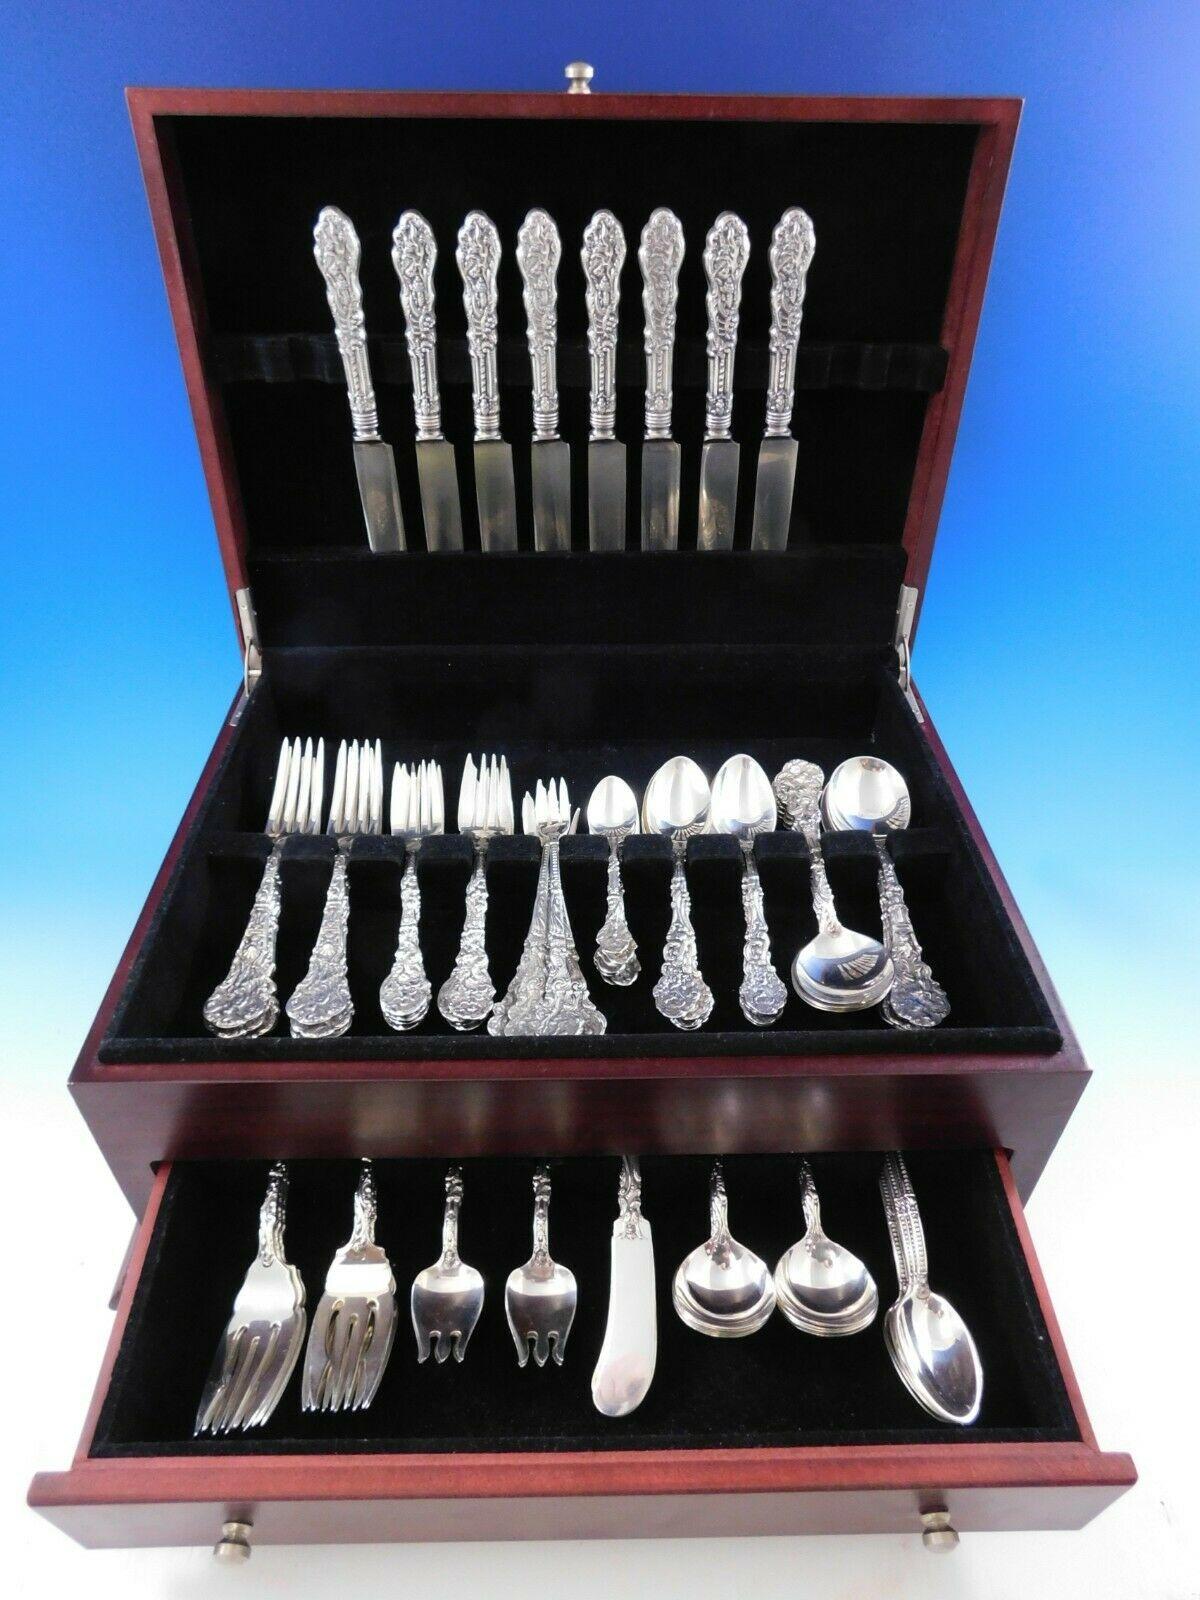 Superb Versailles by Gorham sterling silver flatware set - 96 pieces. This set includes:

8 knives, 8 7/8